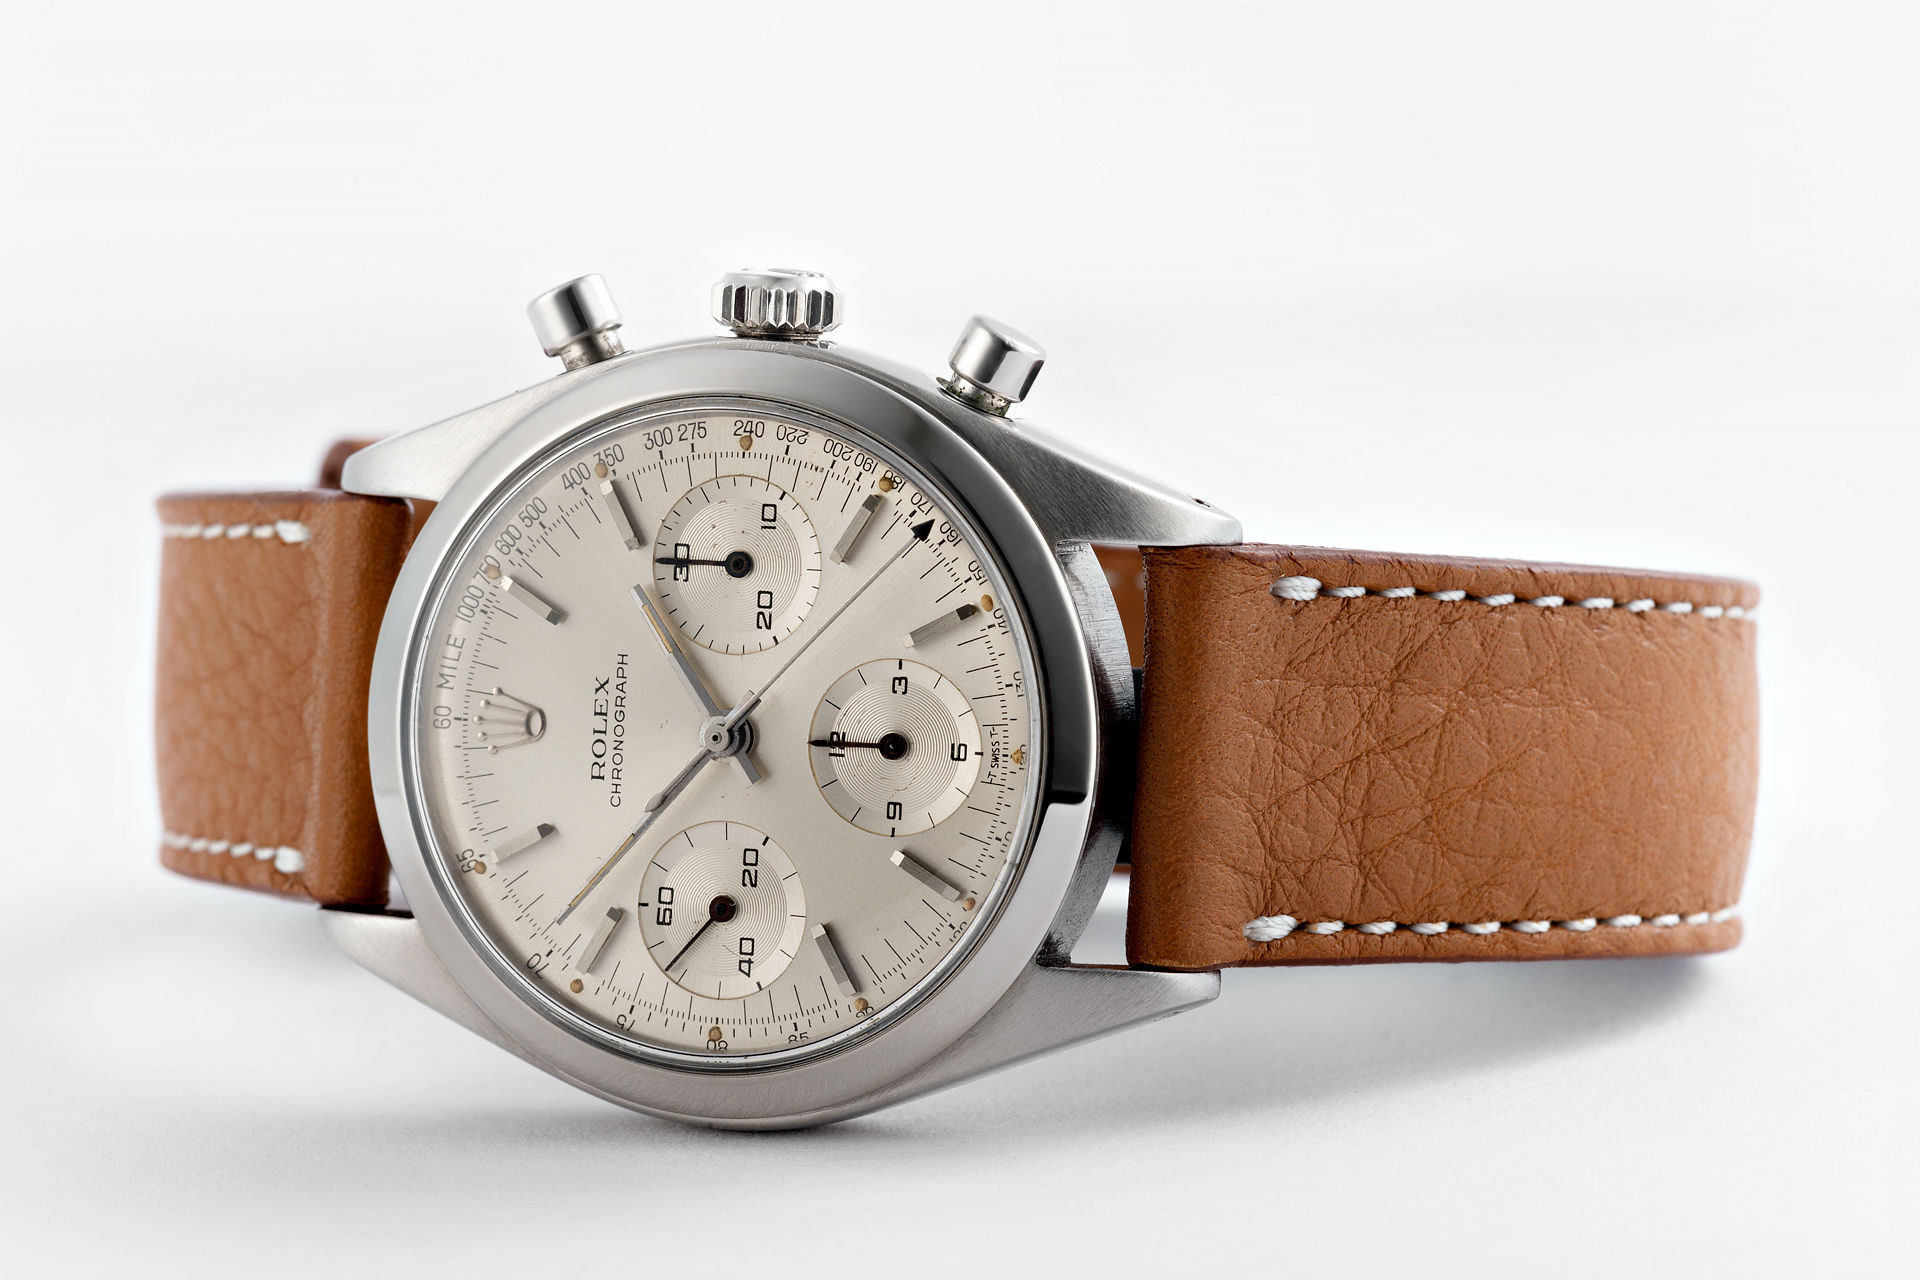 Rolex Chronograph Watches | ref 6238 | 'George The Watch Club